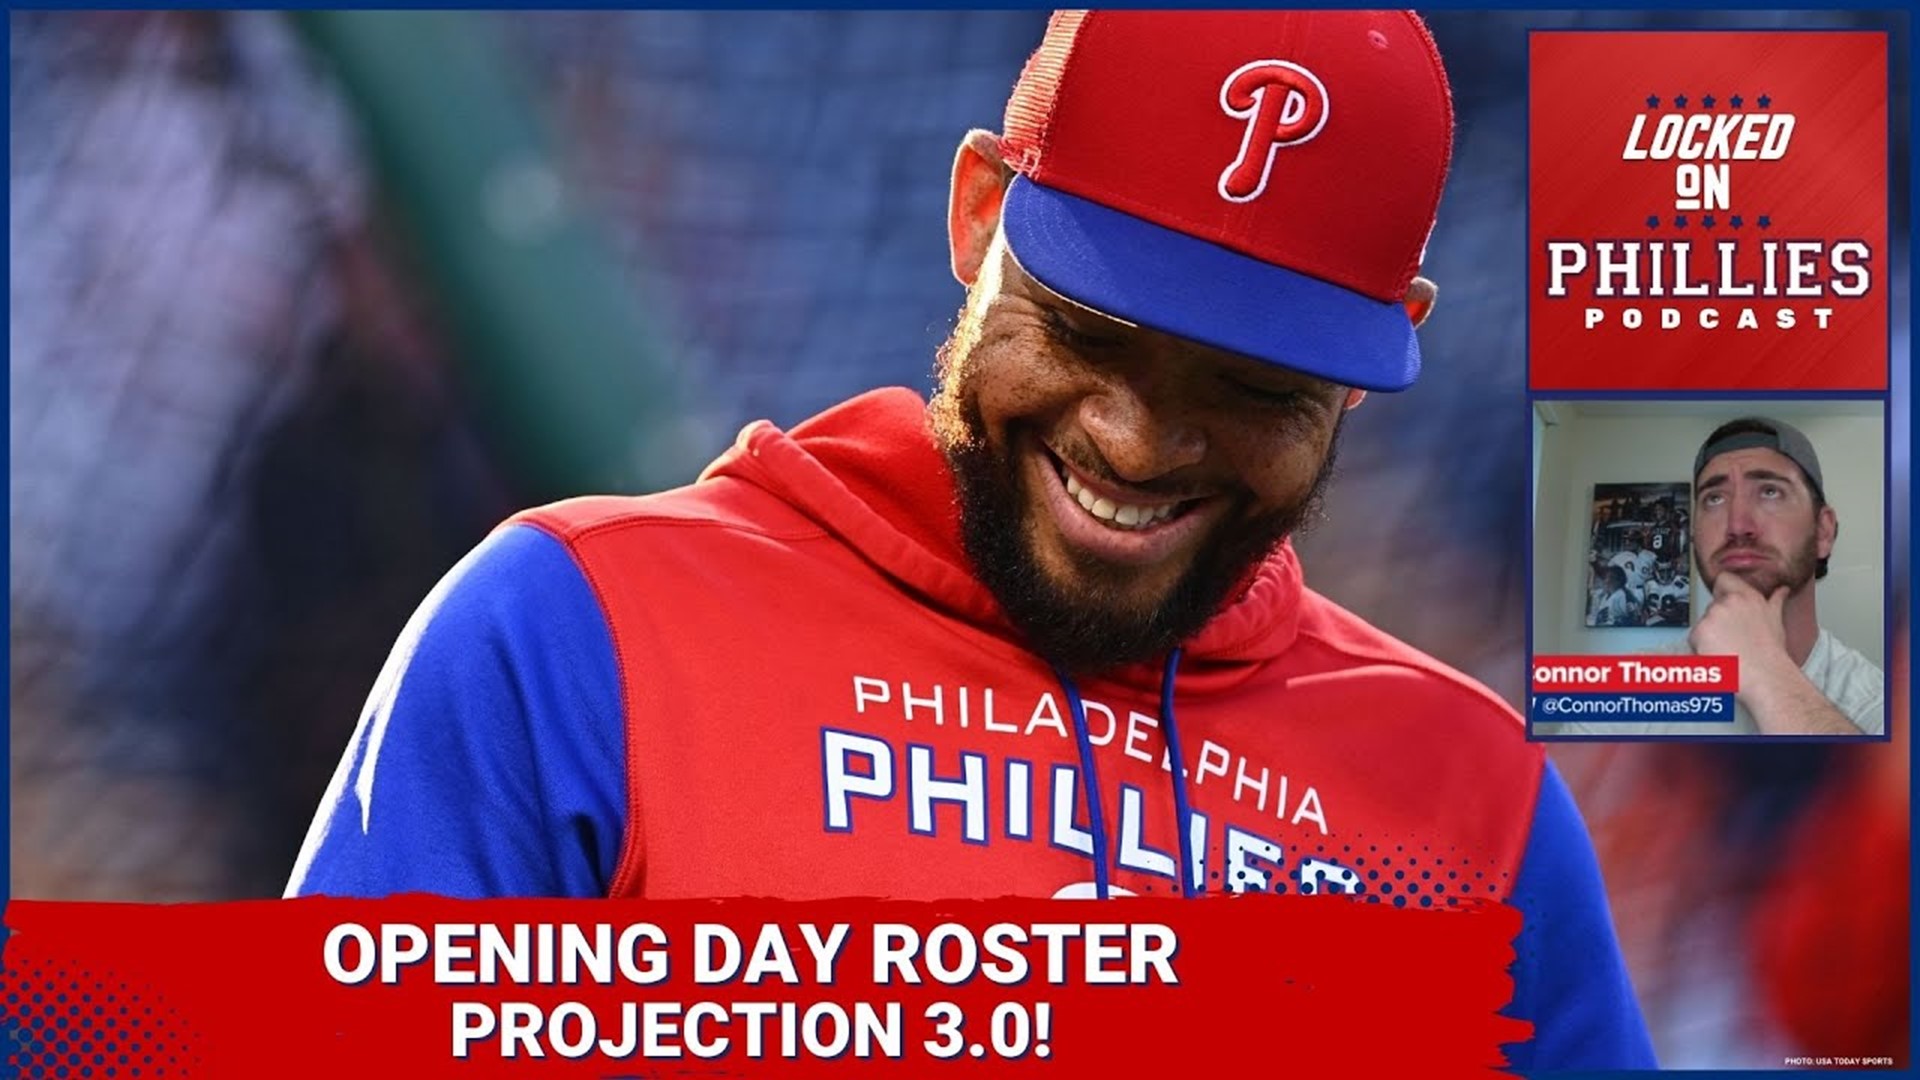 phillies roster 2022